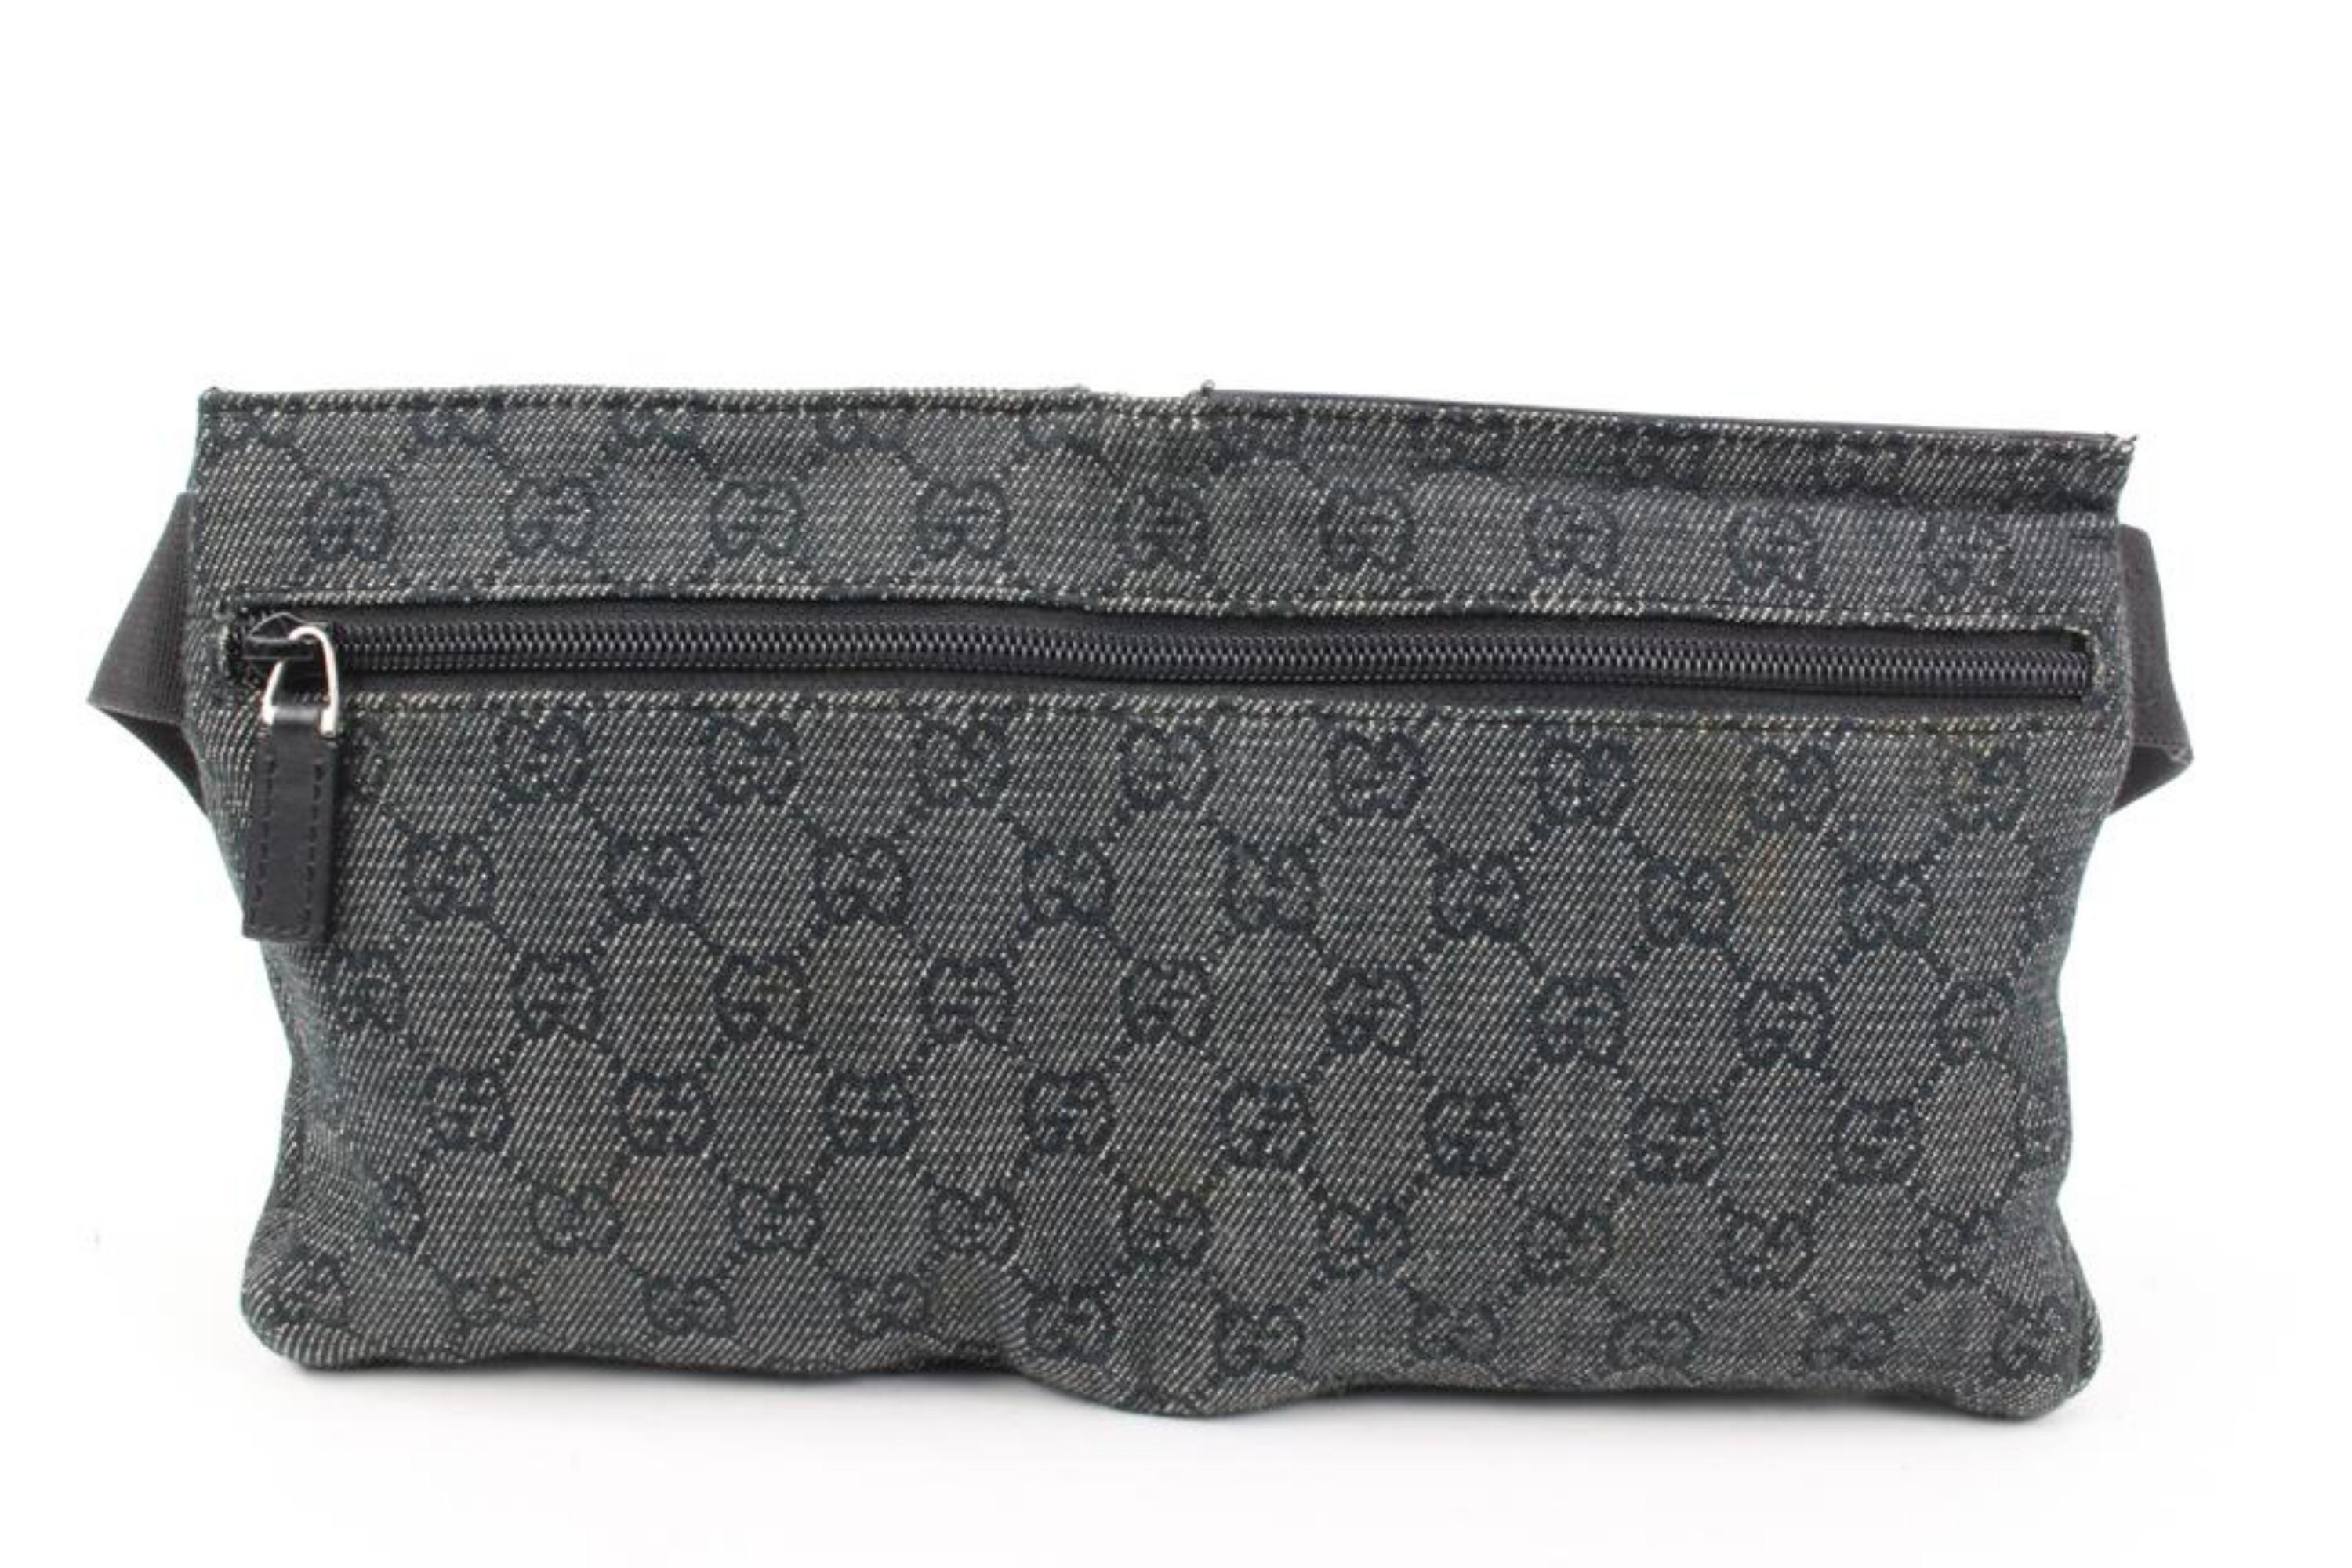 Gucci Black x Grey  Monogram GG Denim Belt Bag Fanny Pack Waist Pouch 3g126s
Date Code/Serial Number: 28566 20047
Made In: Italy
Measurements: Length:  12